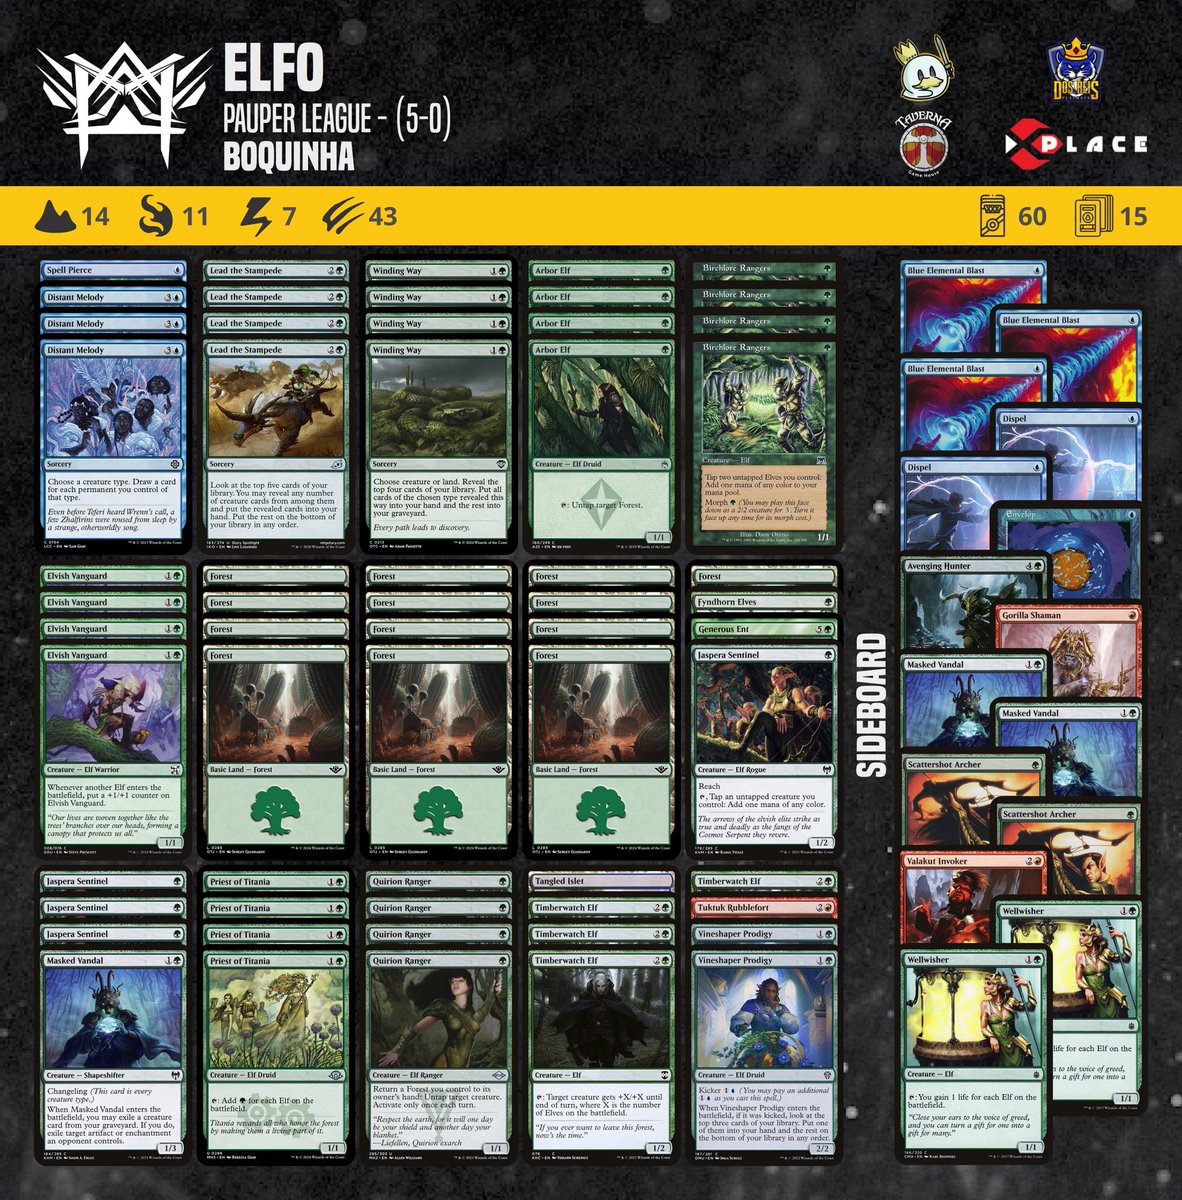 Our athlete Boquinha achieved a 5-0 record in the Pauper League tournament with this Elfo decklist. #pauper #magic #mtgcommon #metagamepauper #mtgpauper #magicthegathering #wizardsofthecoast @PauperDecklists @fireshoes